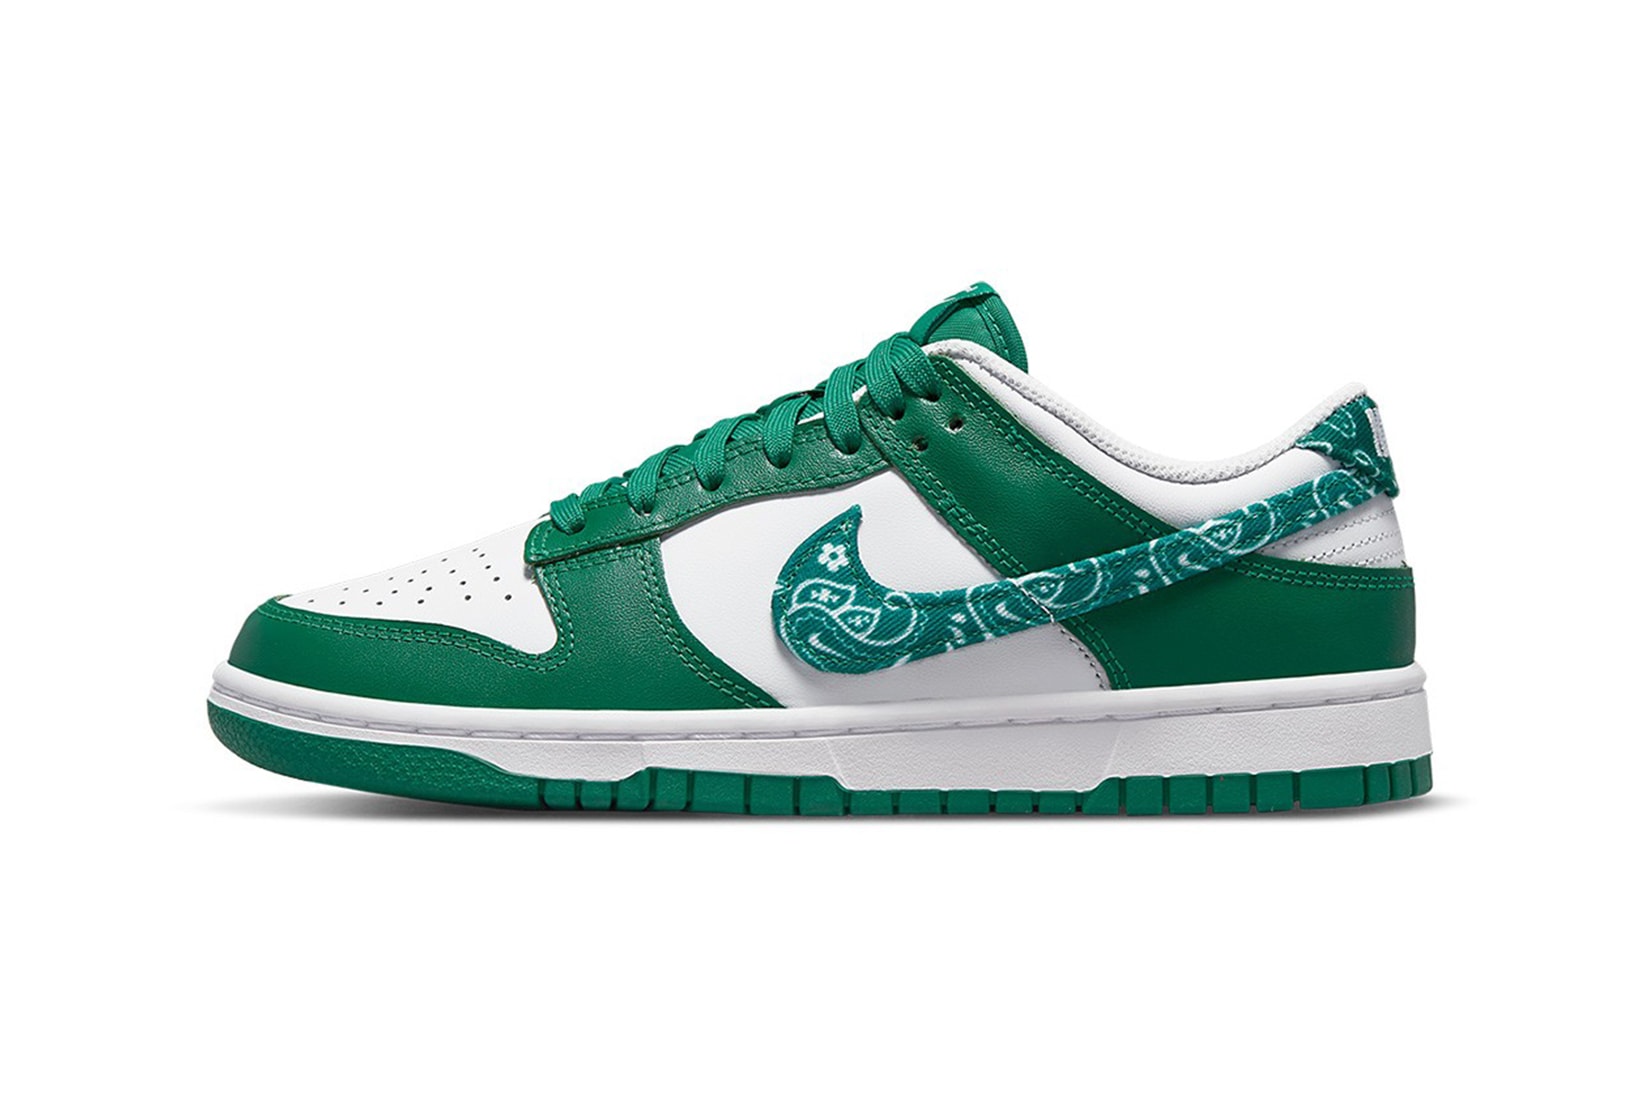 Nike Dunk Low Green Paisley Sneakers Lateral View